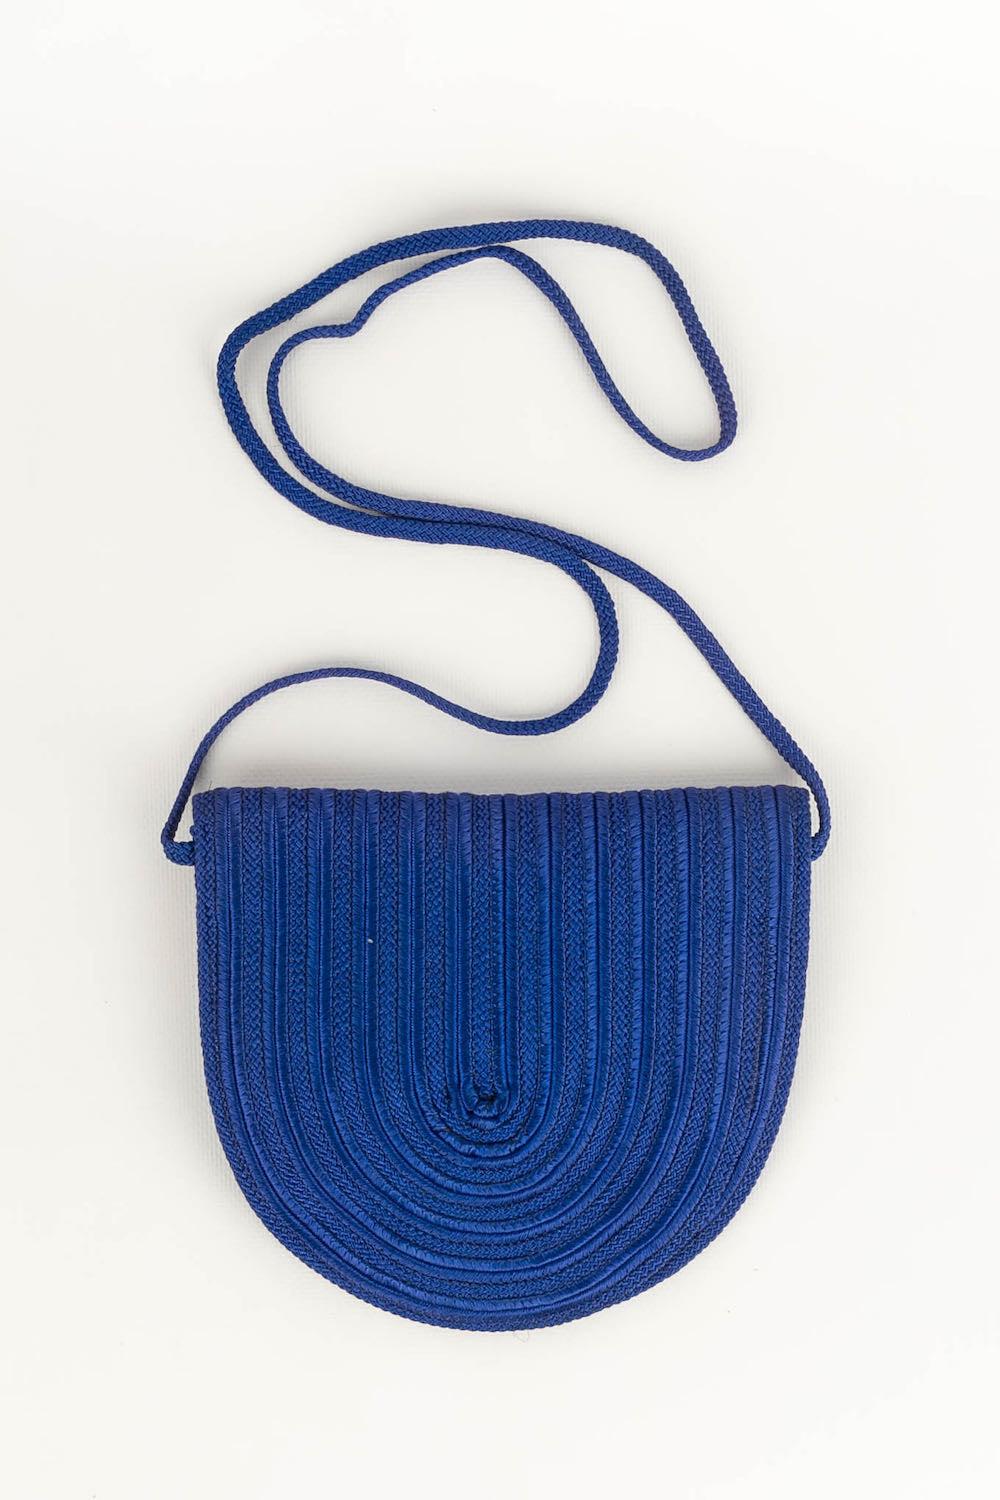 Nina Ricci -Bag in blue passementerie. To note, discoloration (see photo).

Additional information: 
Dimensions: Height: 17 m, Width: 19 cm, Handle: 105 cm
Condition: Good condition
Seller Ref number: S117
